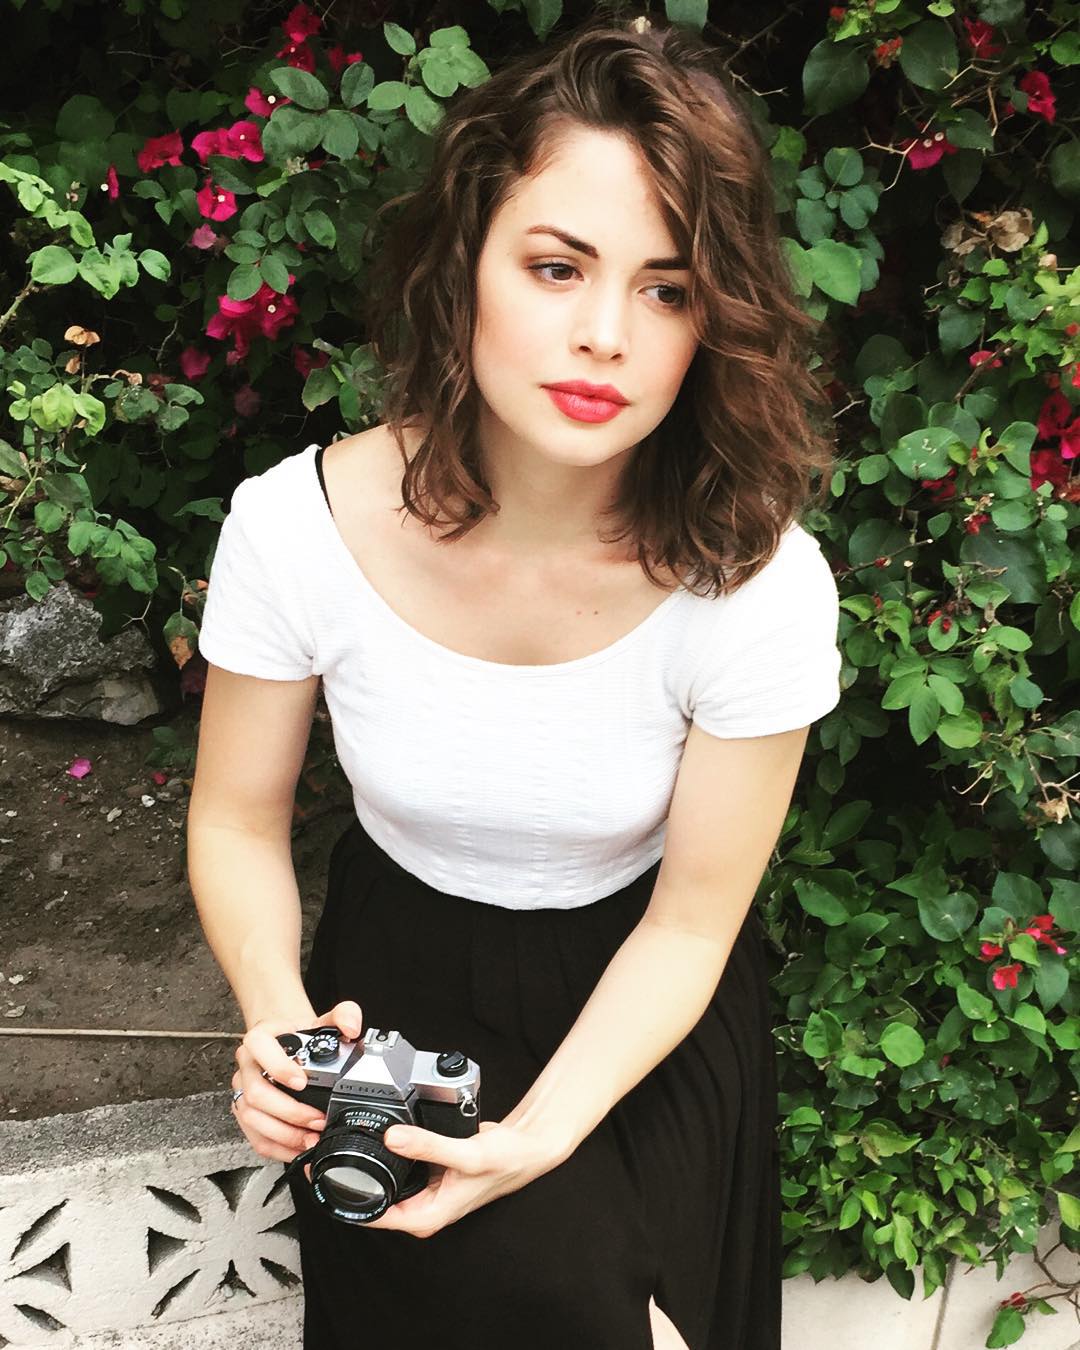 65+ Hot Pictures Of Conor Leslie Which Will Make You Fall In Love With Her | Best Of Comic Books